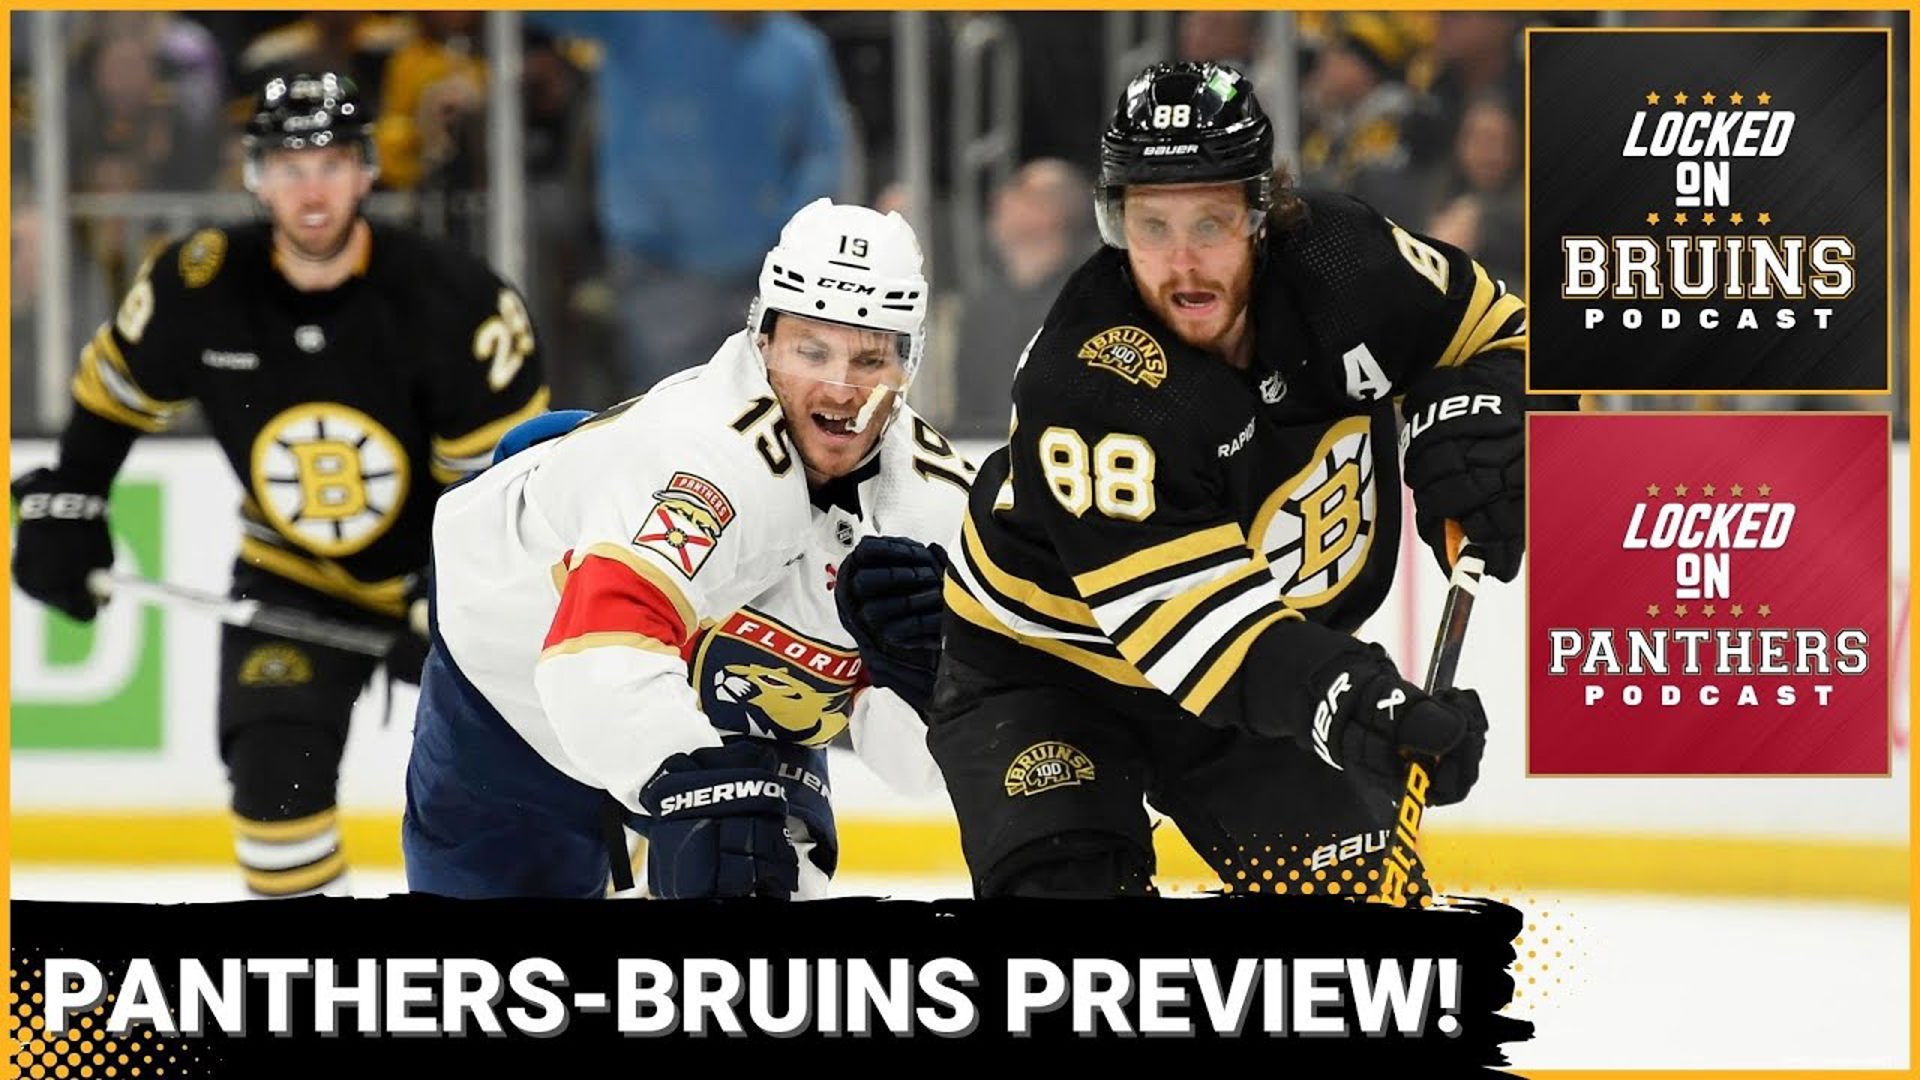 Bruins vs. Panthers Series Preview: A Locked On Crossover